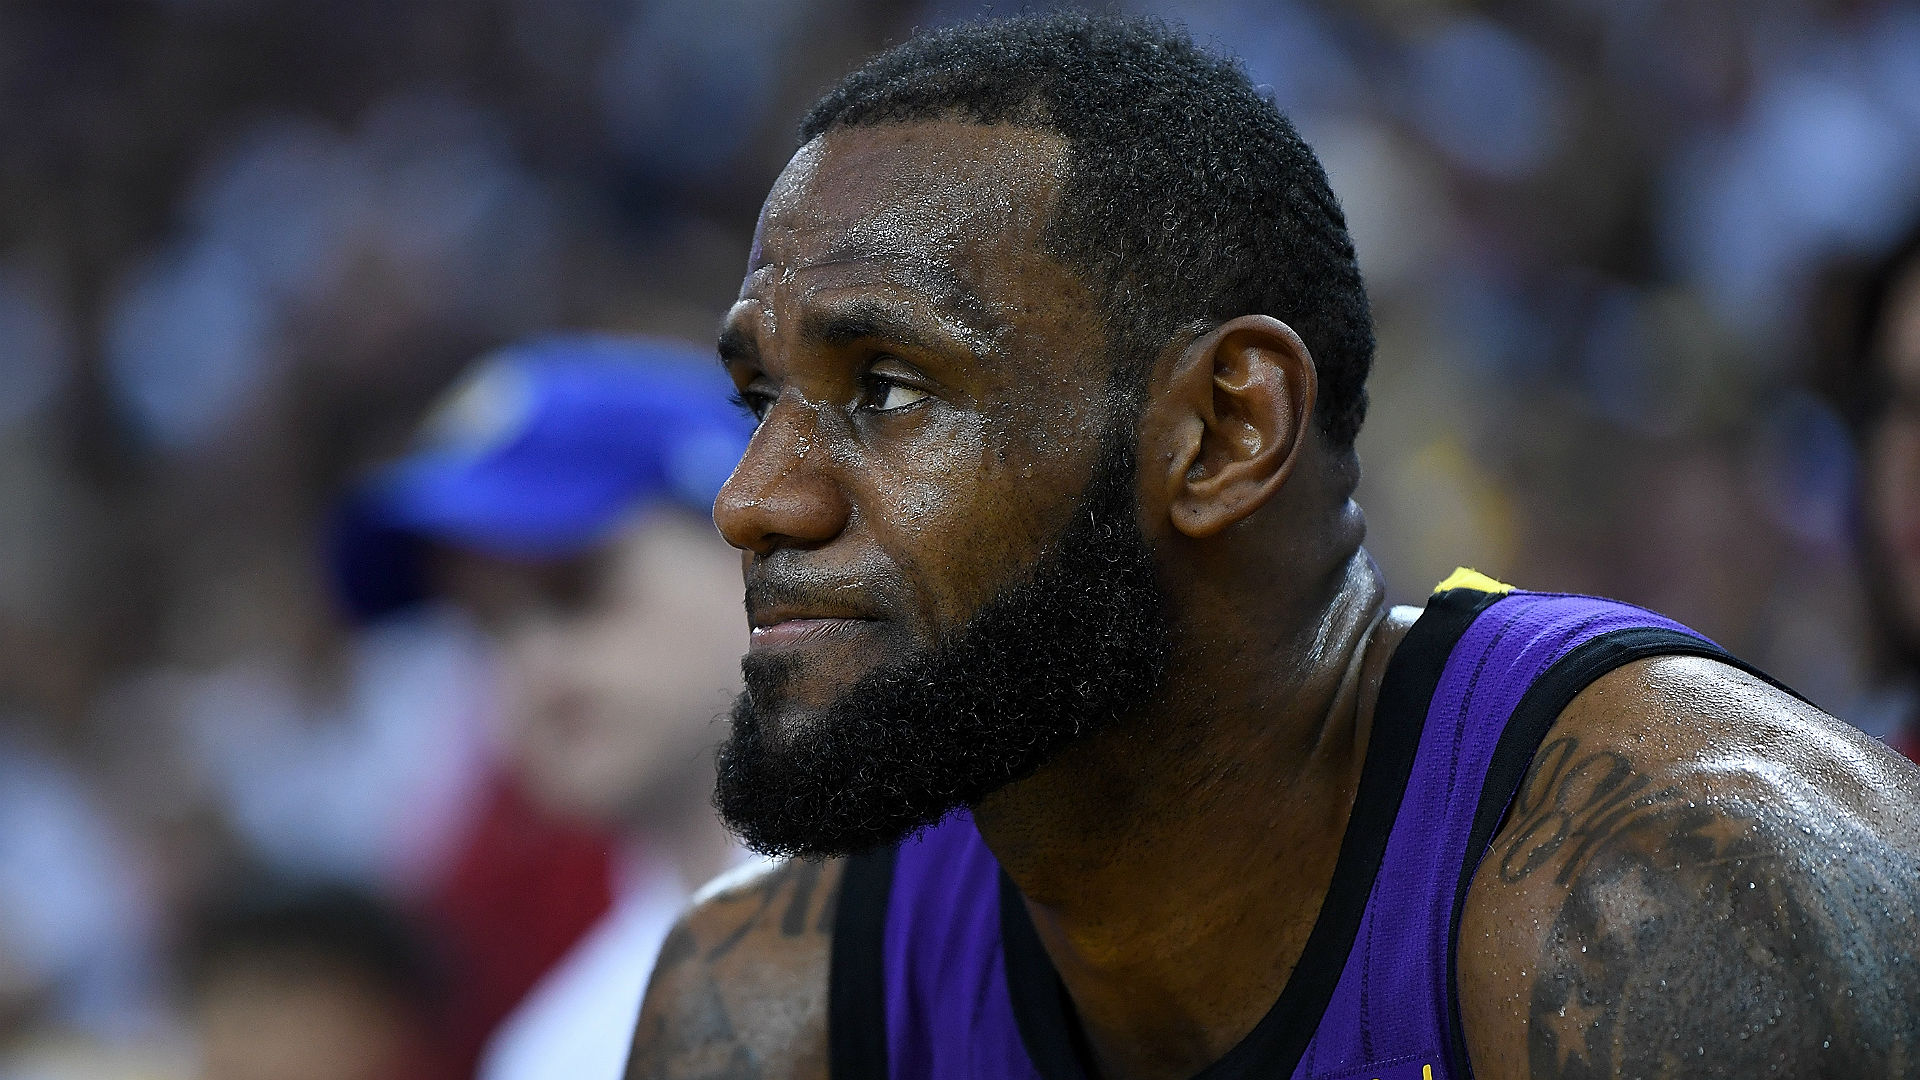 LeBron James will miss the Los Angeles Lakers' next two NBA games against the Detroit Pistons on Wednesday and the Utah Jazz two days later.